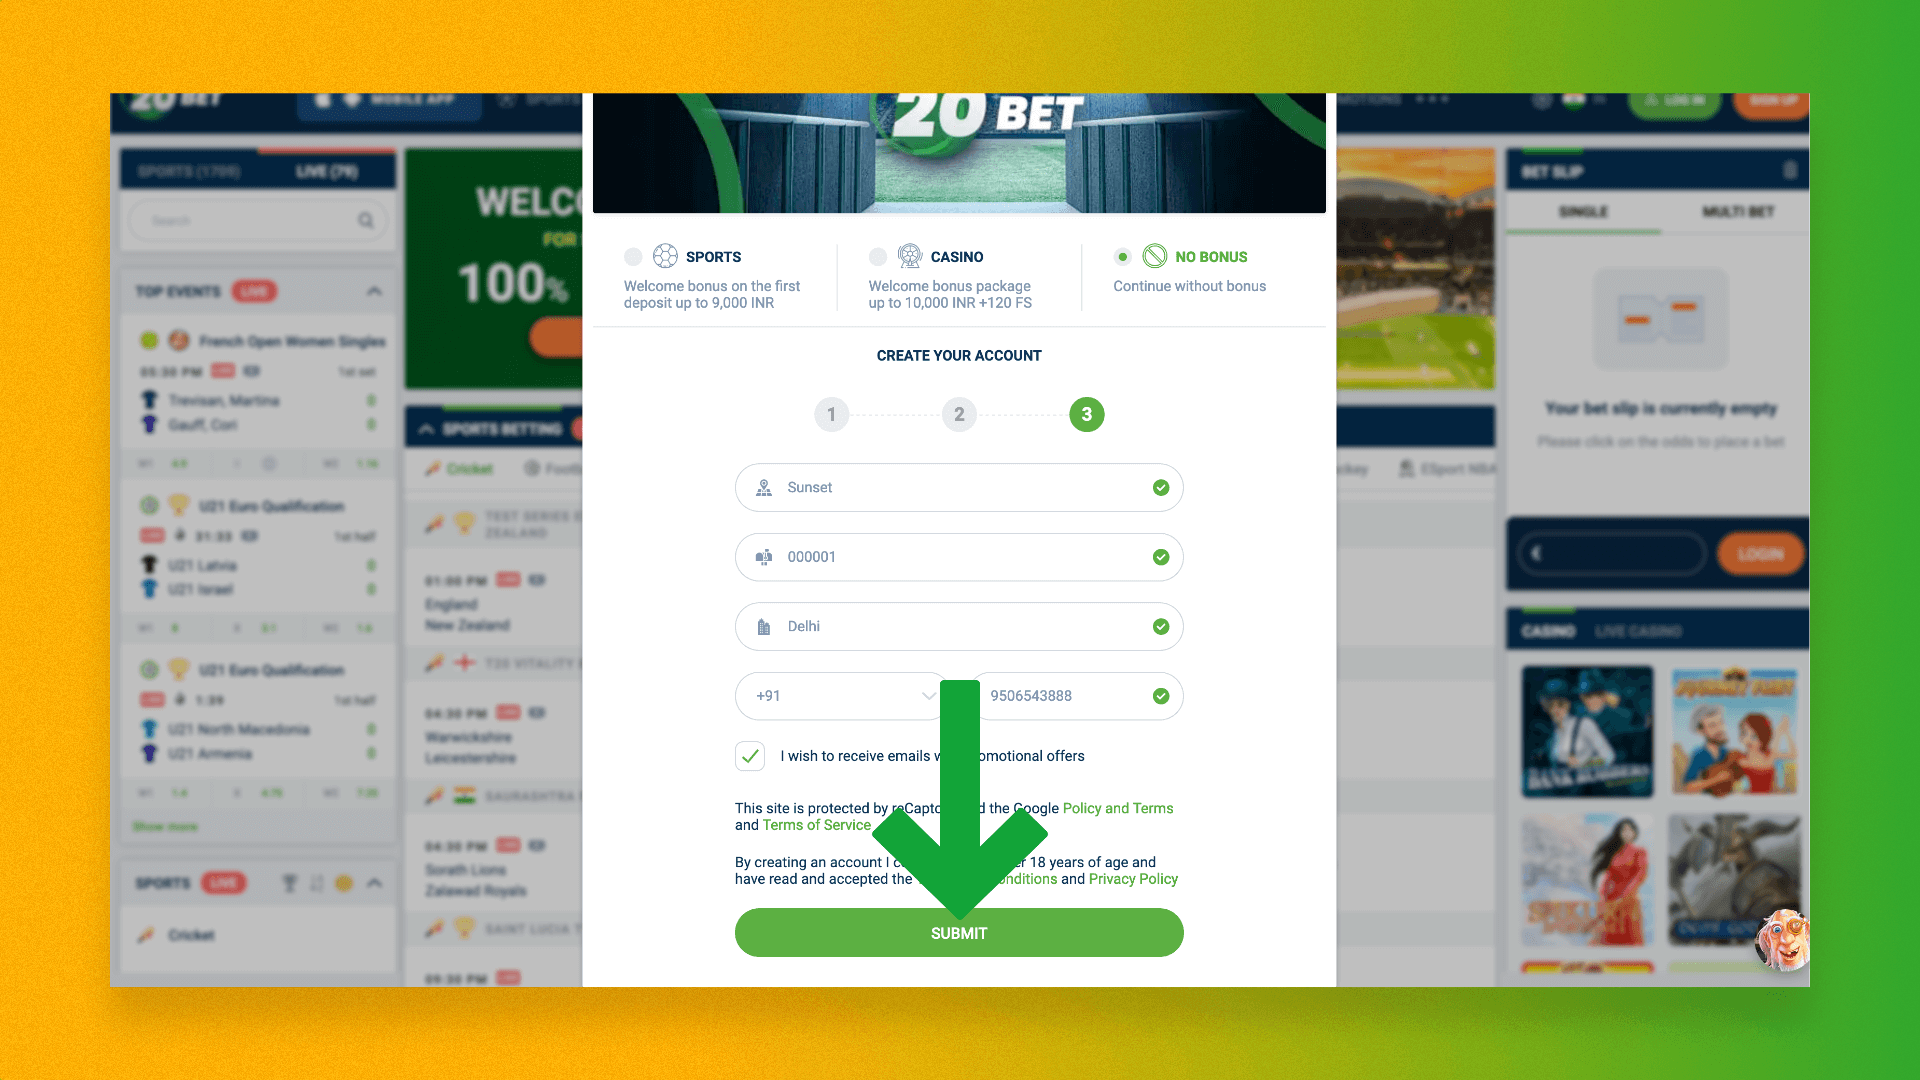 Completing a new user registration on the official website of 20Bet